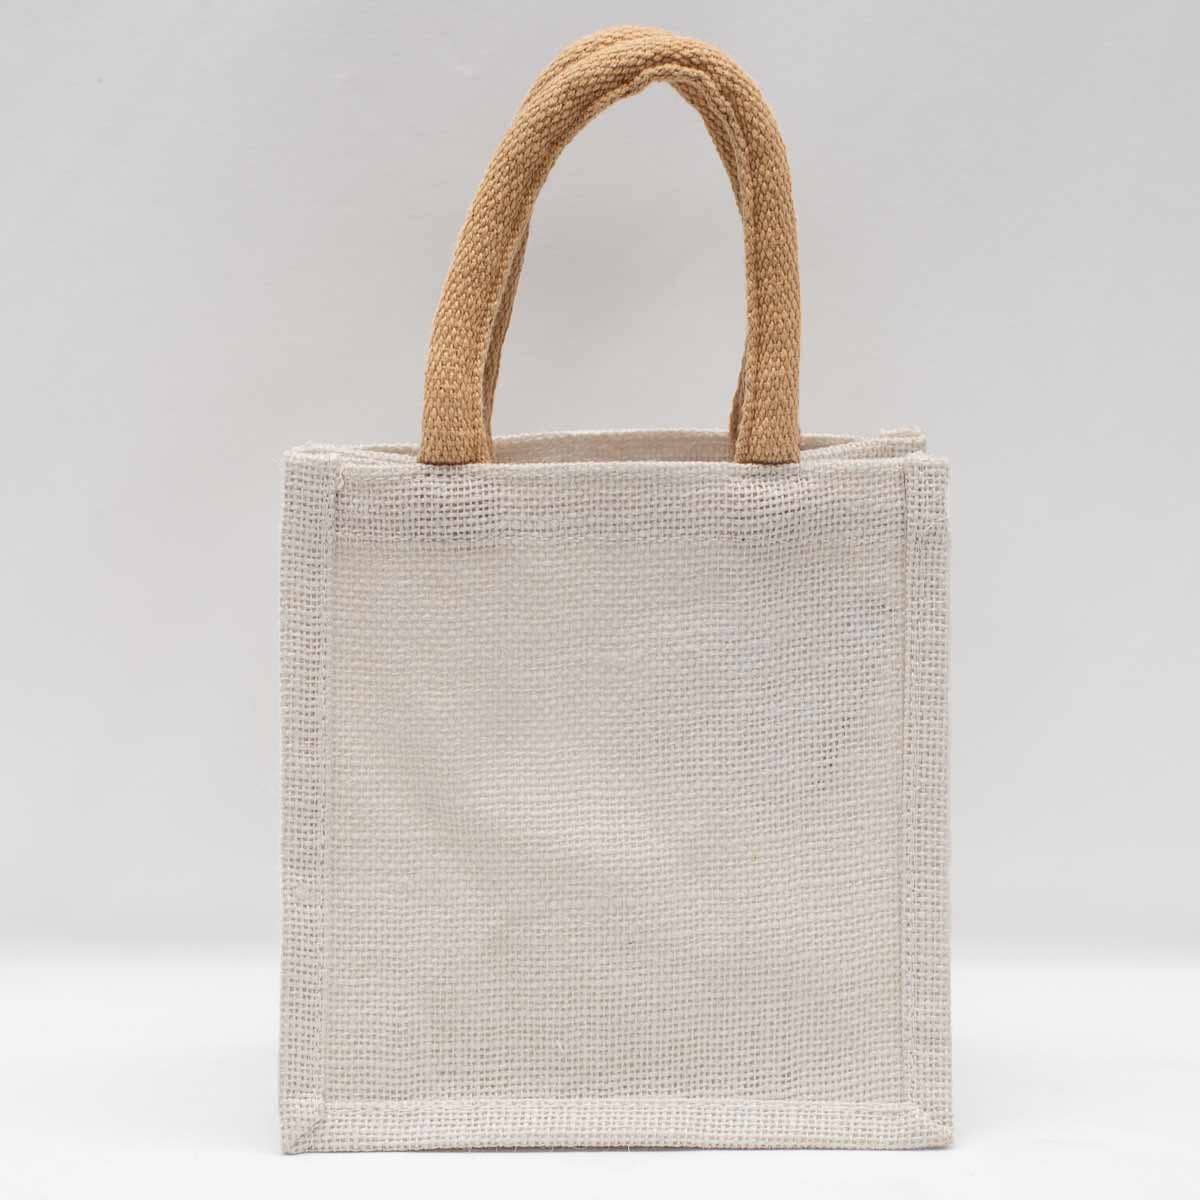 Jute Petite Gift Tote, White by The Royal Standard